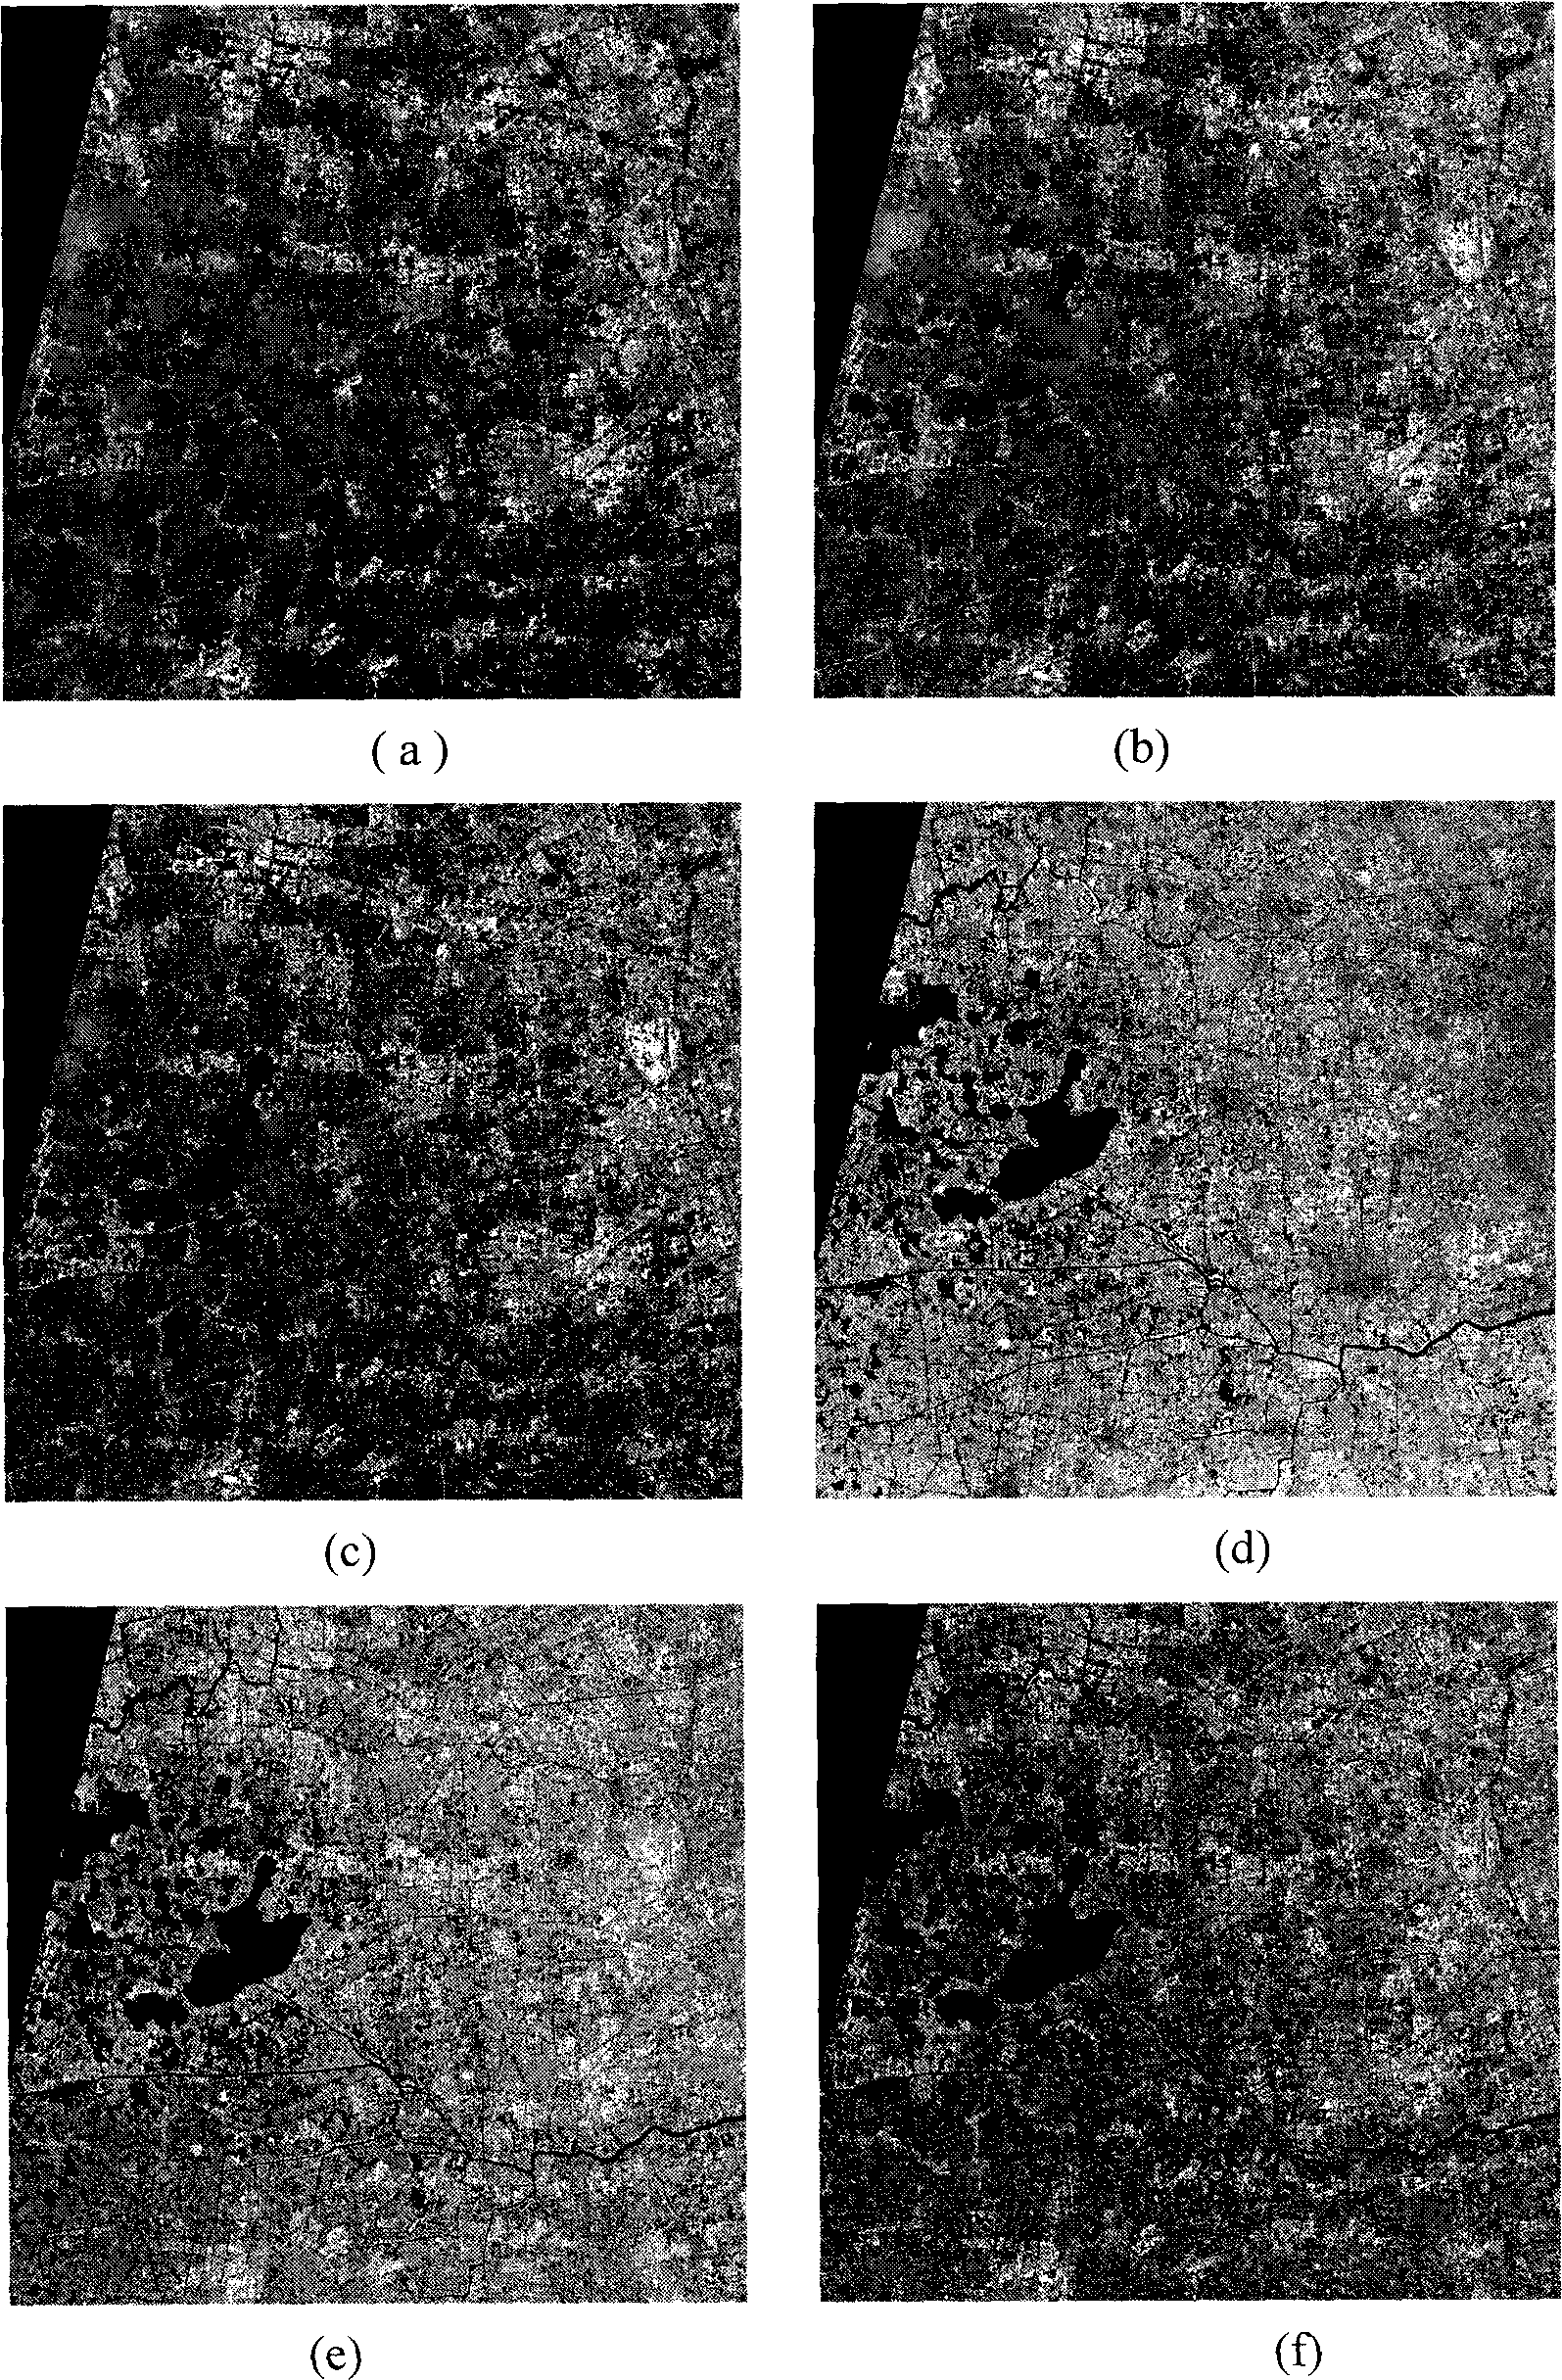 Extraction method of water body thematic information of remote sensing image based on sequential nonlinear filtering